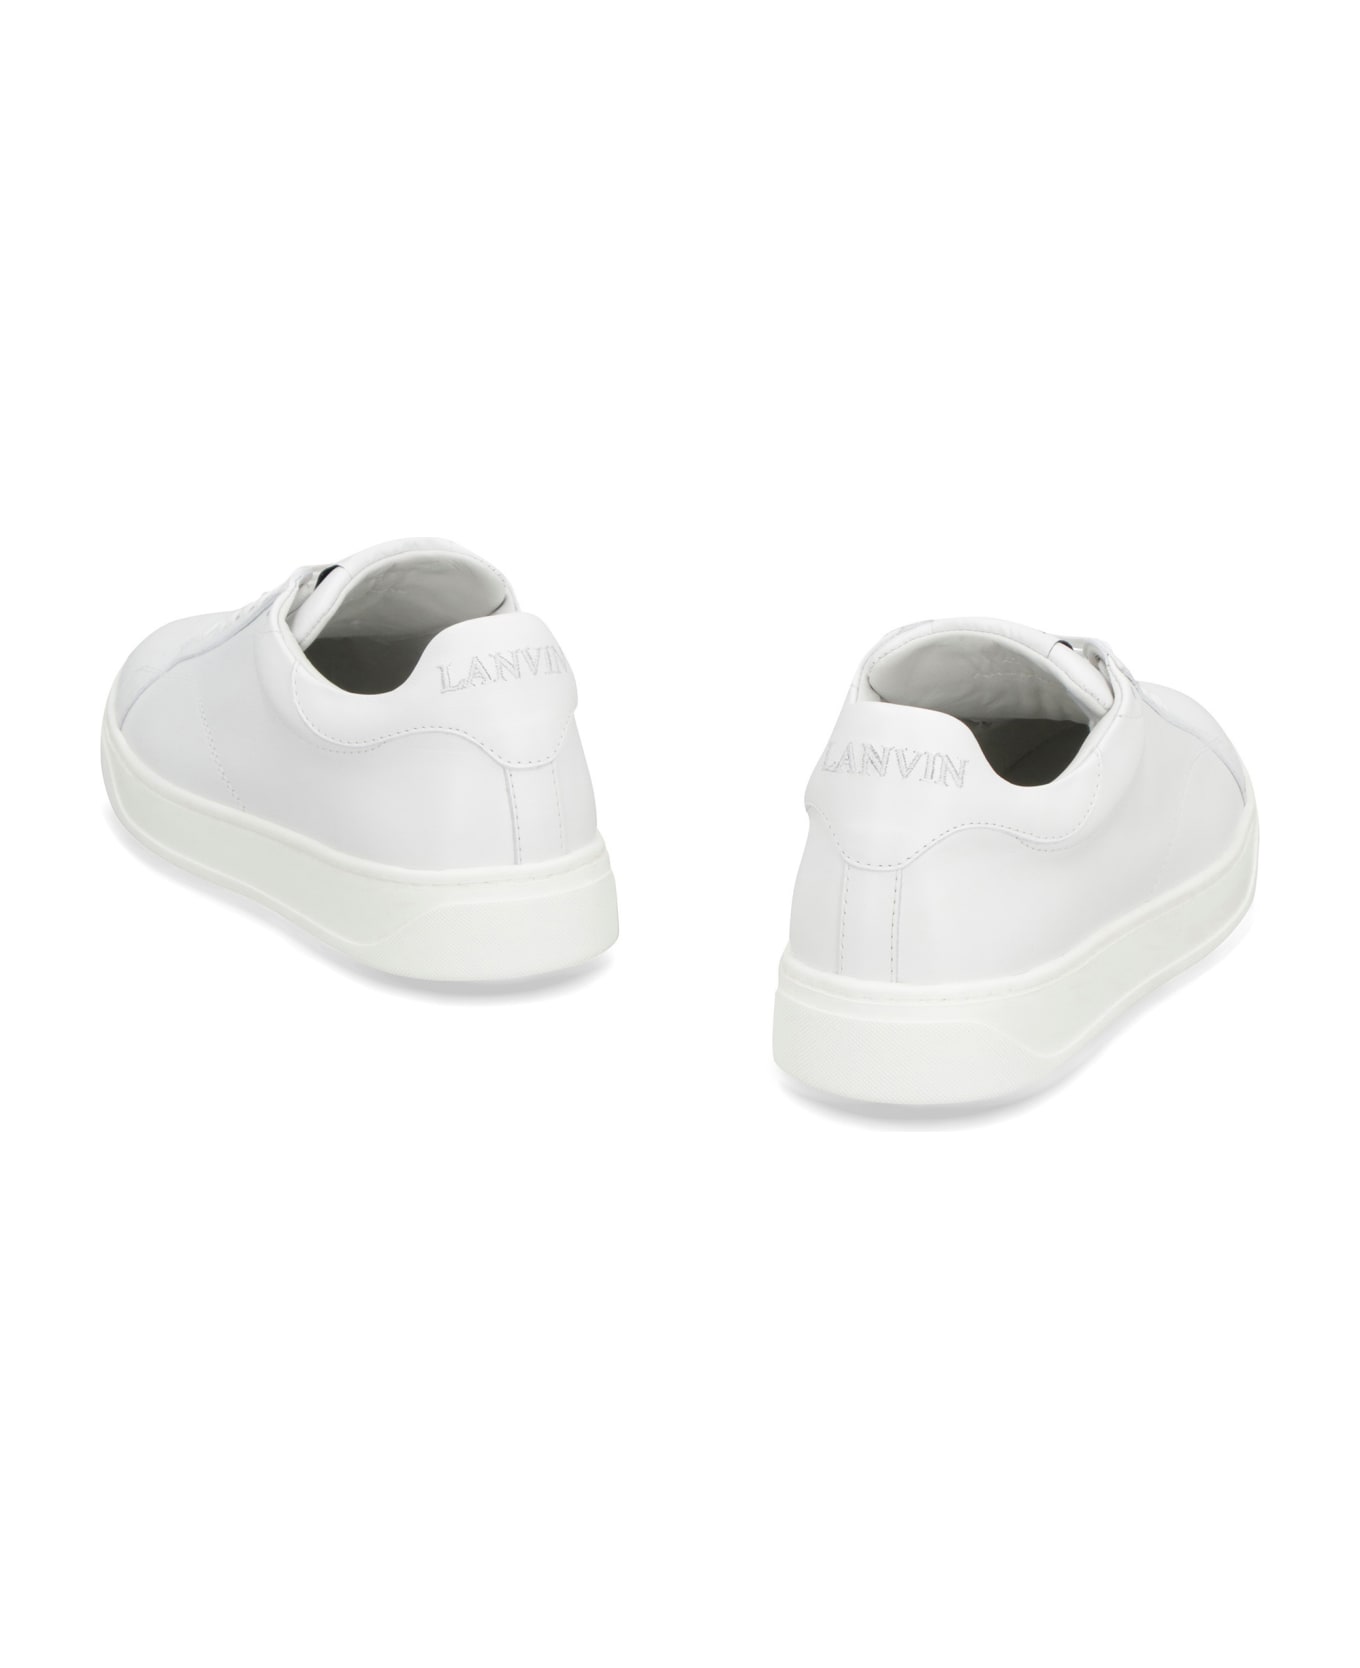 Lanvin Ddb0 Leather Low-top Sneakers - White